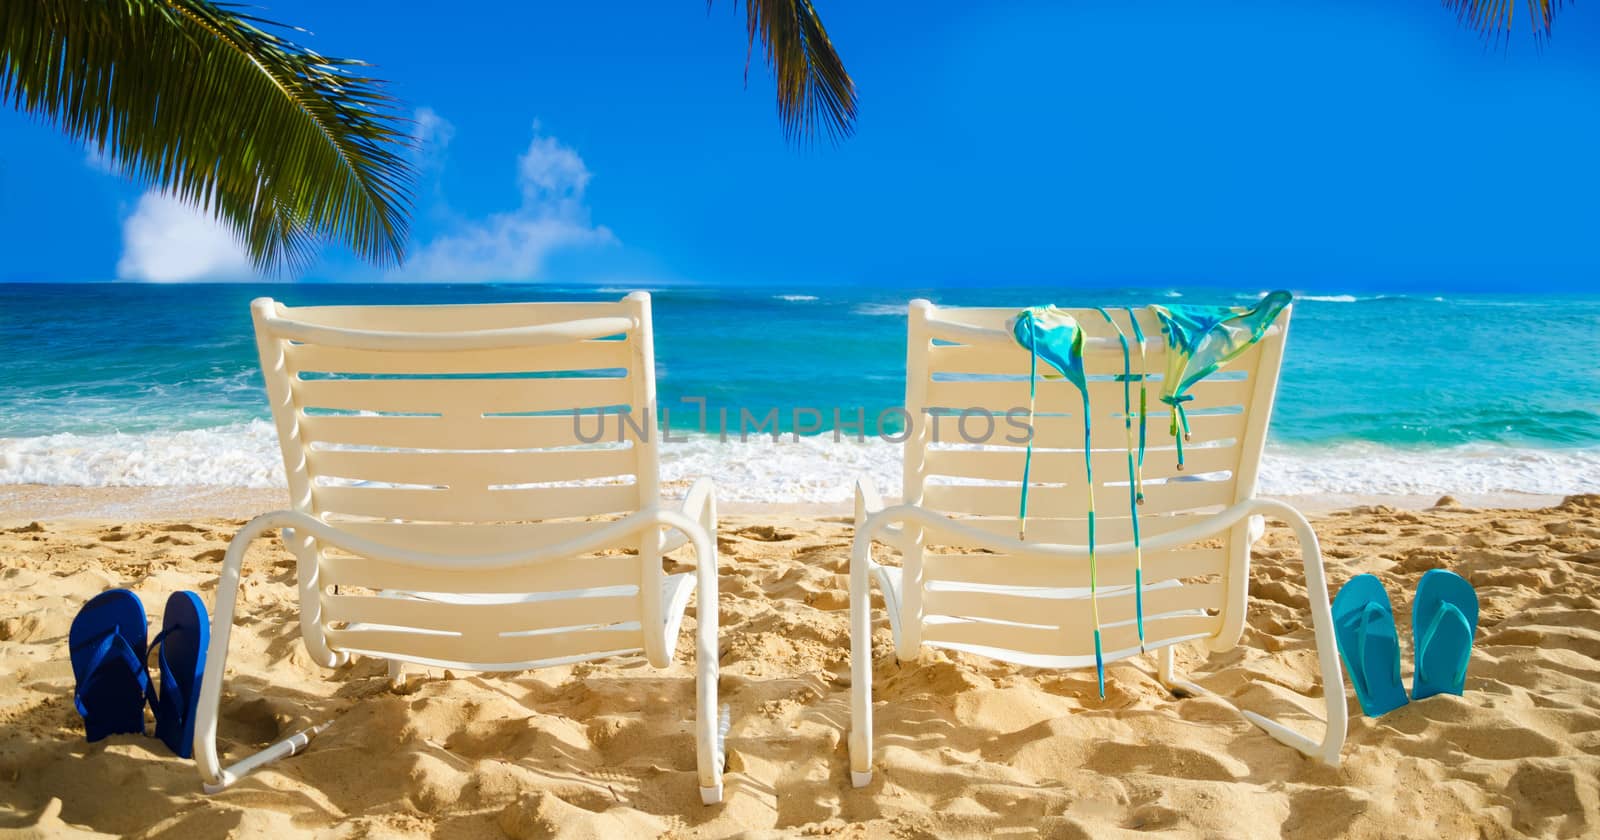 Two white beach chairs under palm leaves by the ocean, with bikini and flip flops.